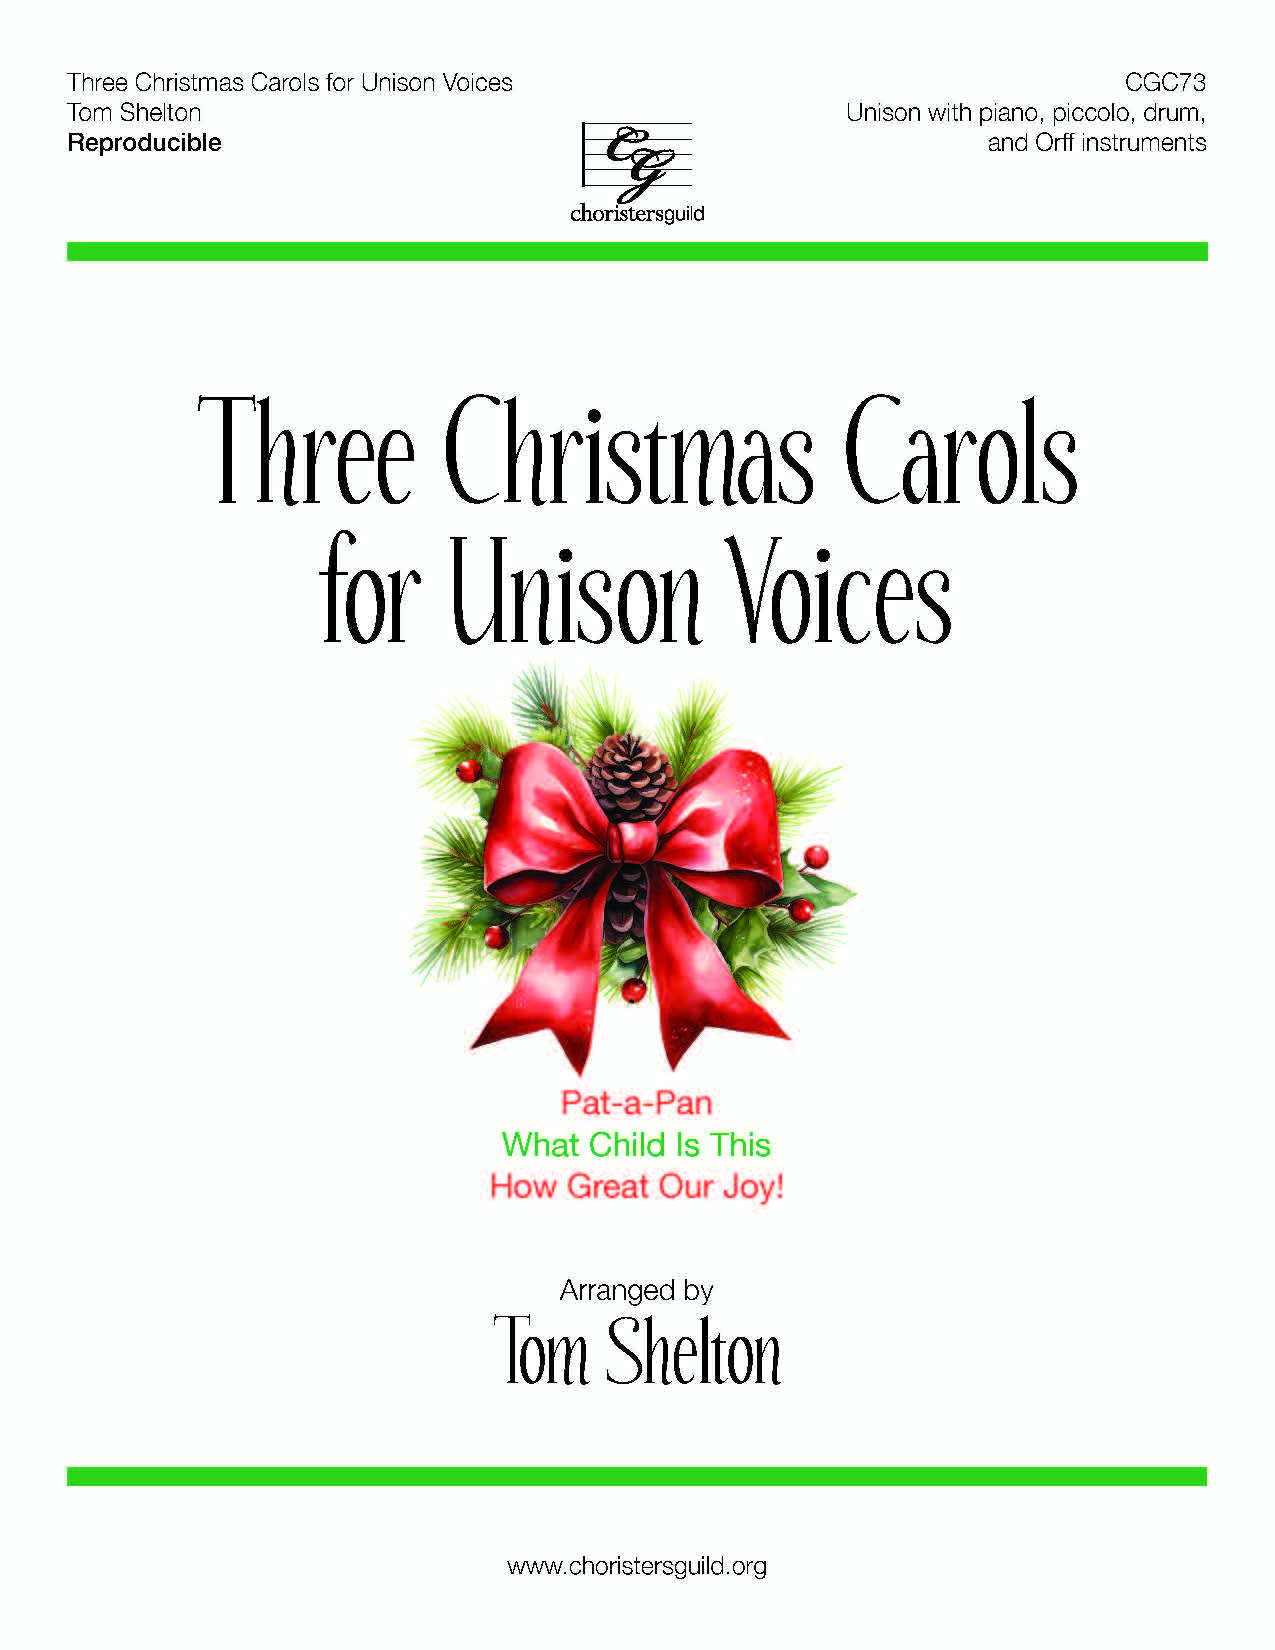 Three Christmas Carols for Unison Voices (Reproducible with MP3s)